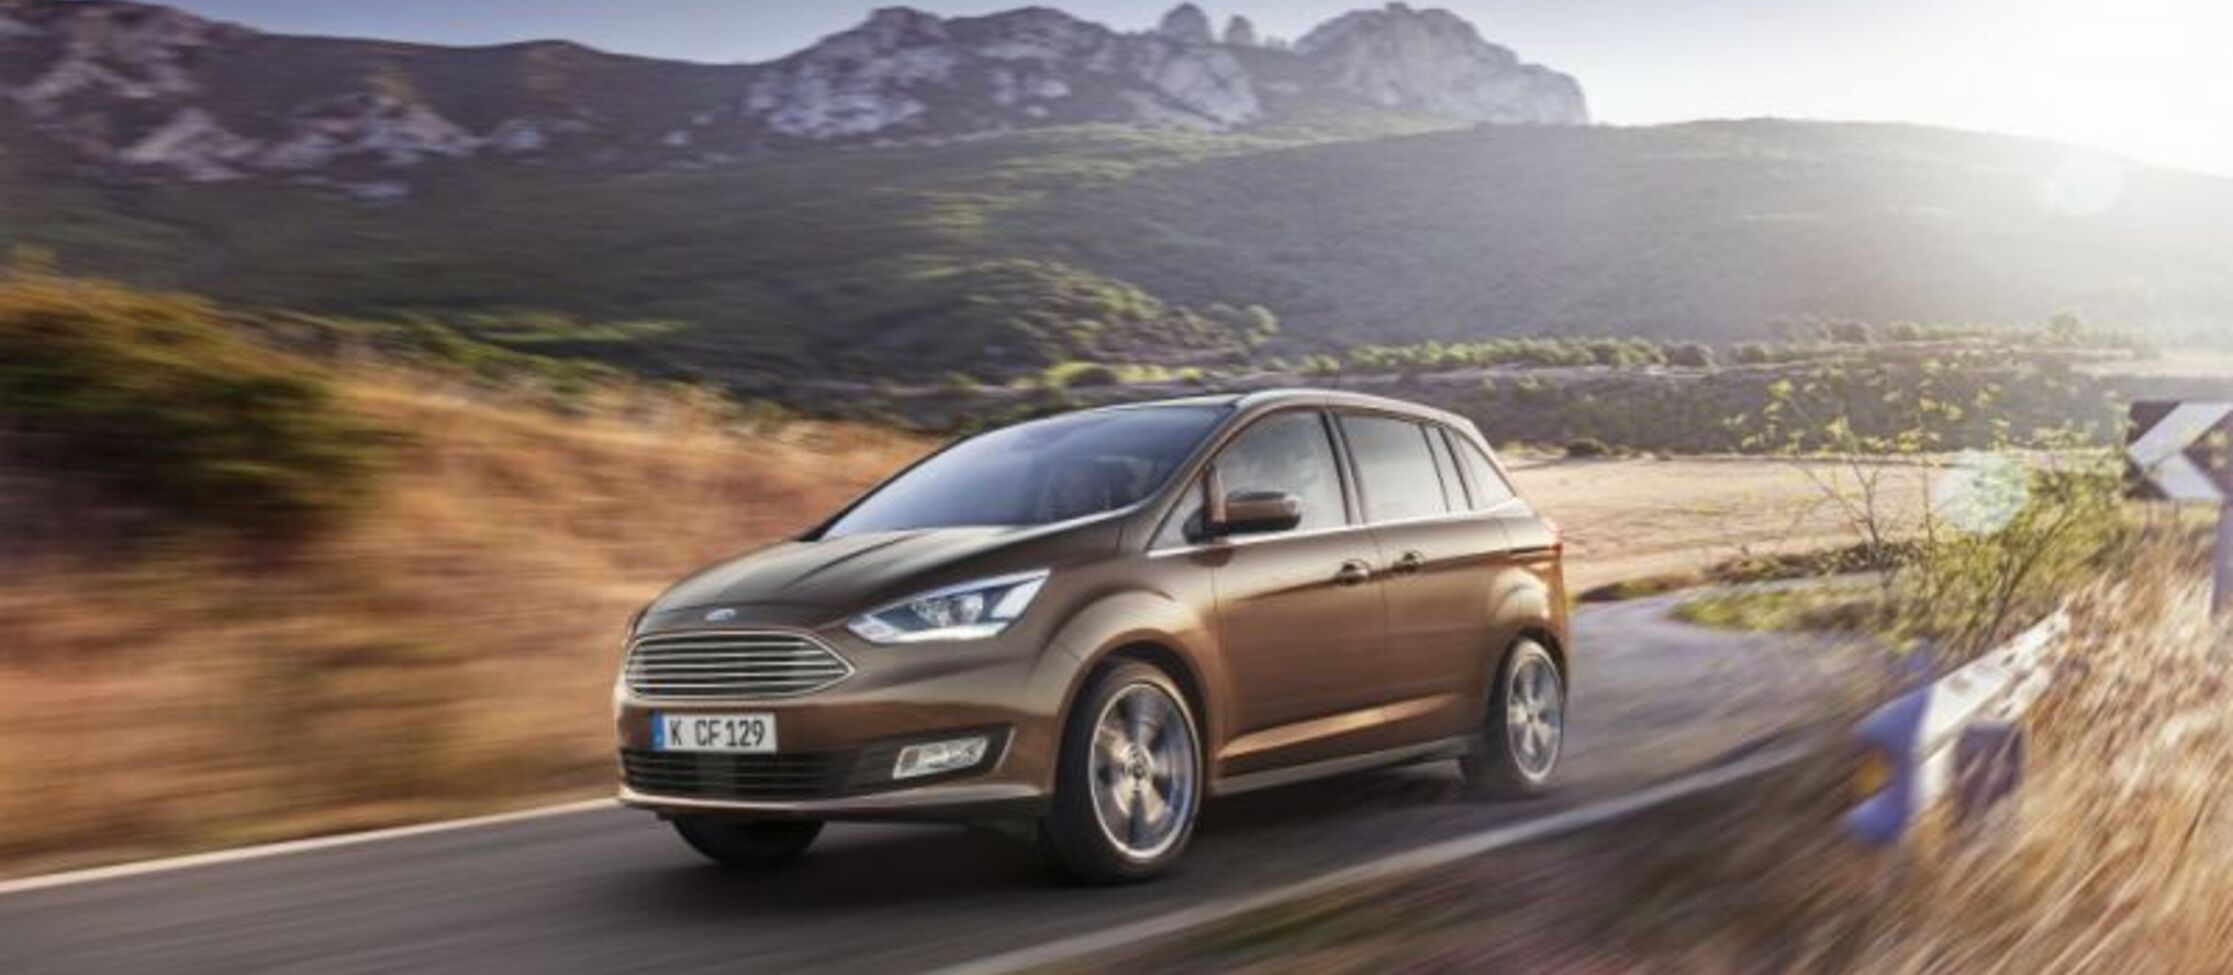 Ford Grand C-MAX (facelift 2015) 1.5 TDCi (95 Hp) 2015, 2016, 2017, 2018, 2019, 2020, 2021